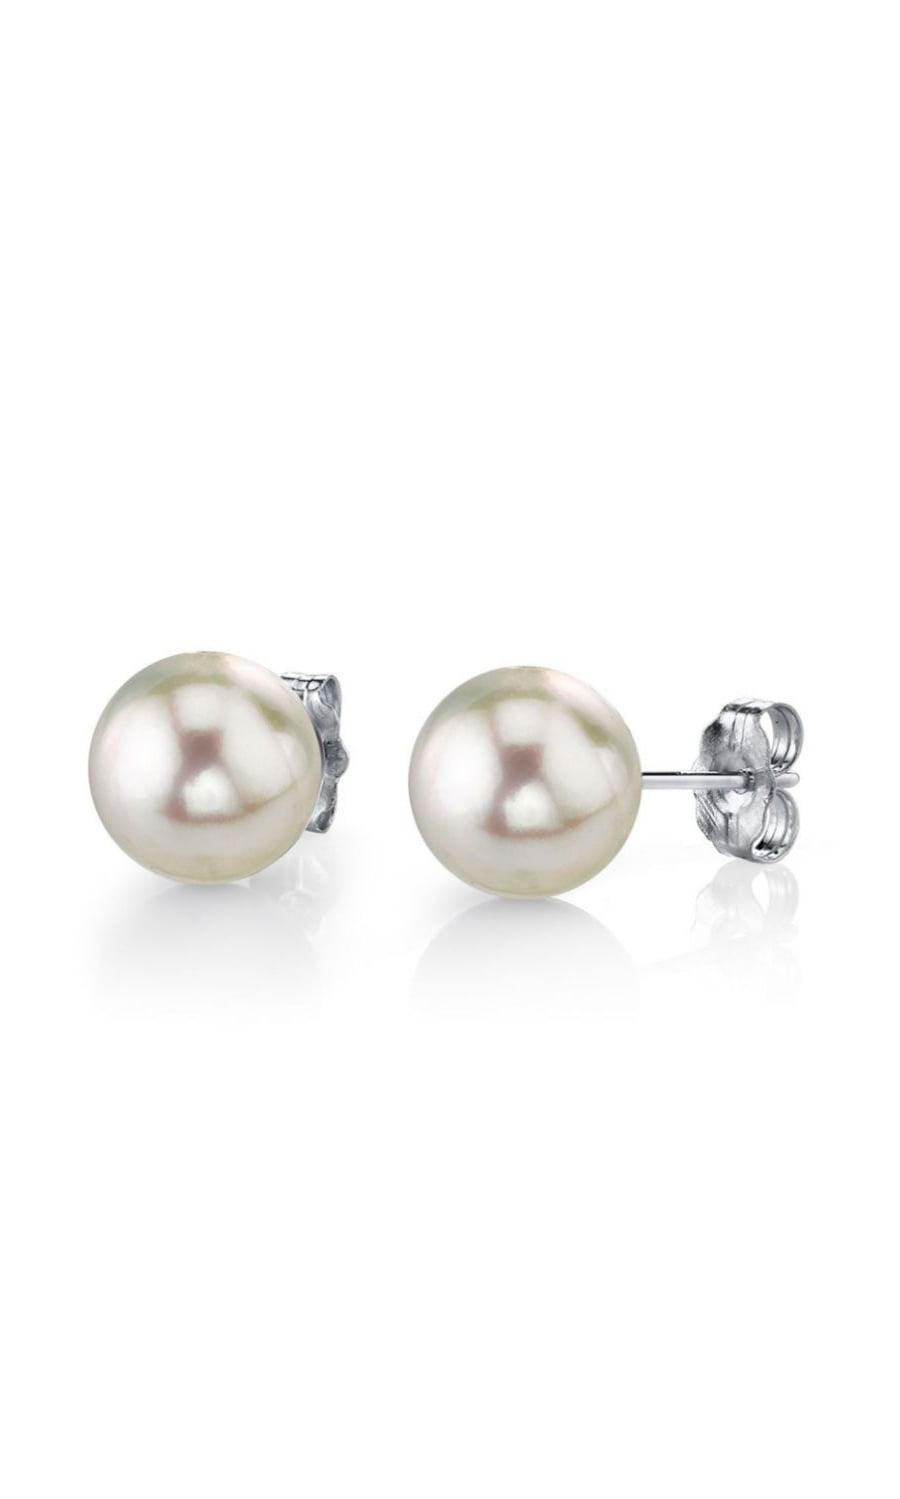 THE PEARL SOURCE White Akoya Cultured Pearl Earrings for Women with 14K Gold in AAA Quality 